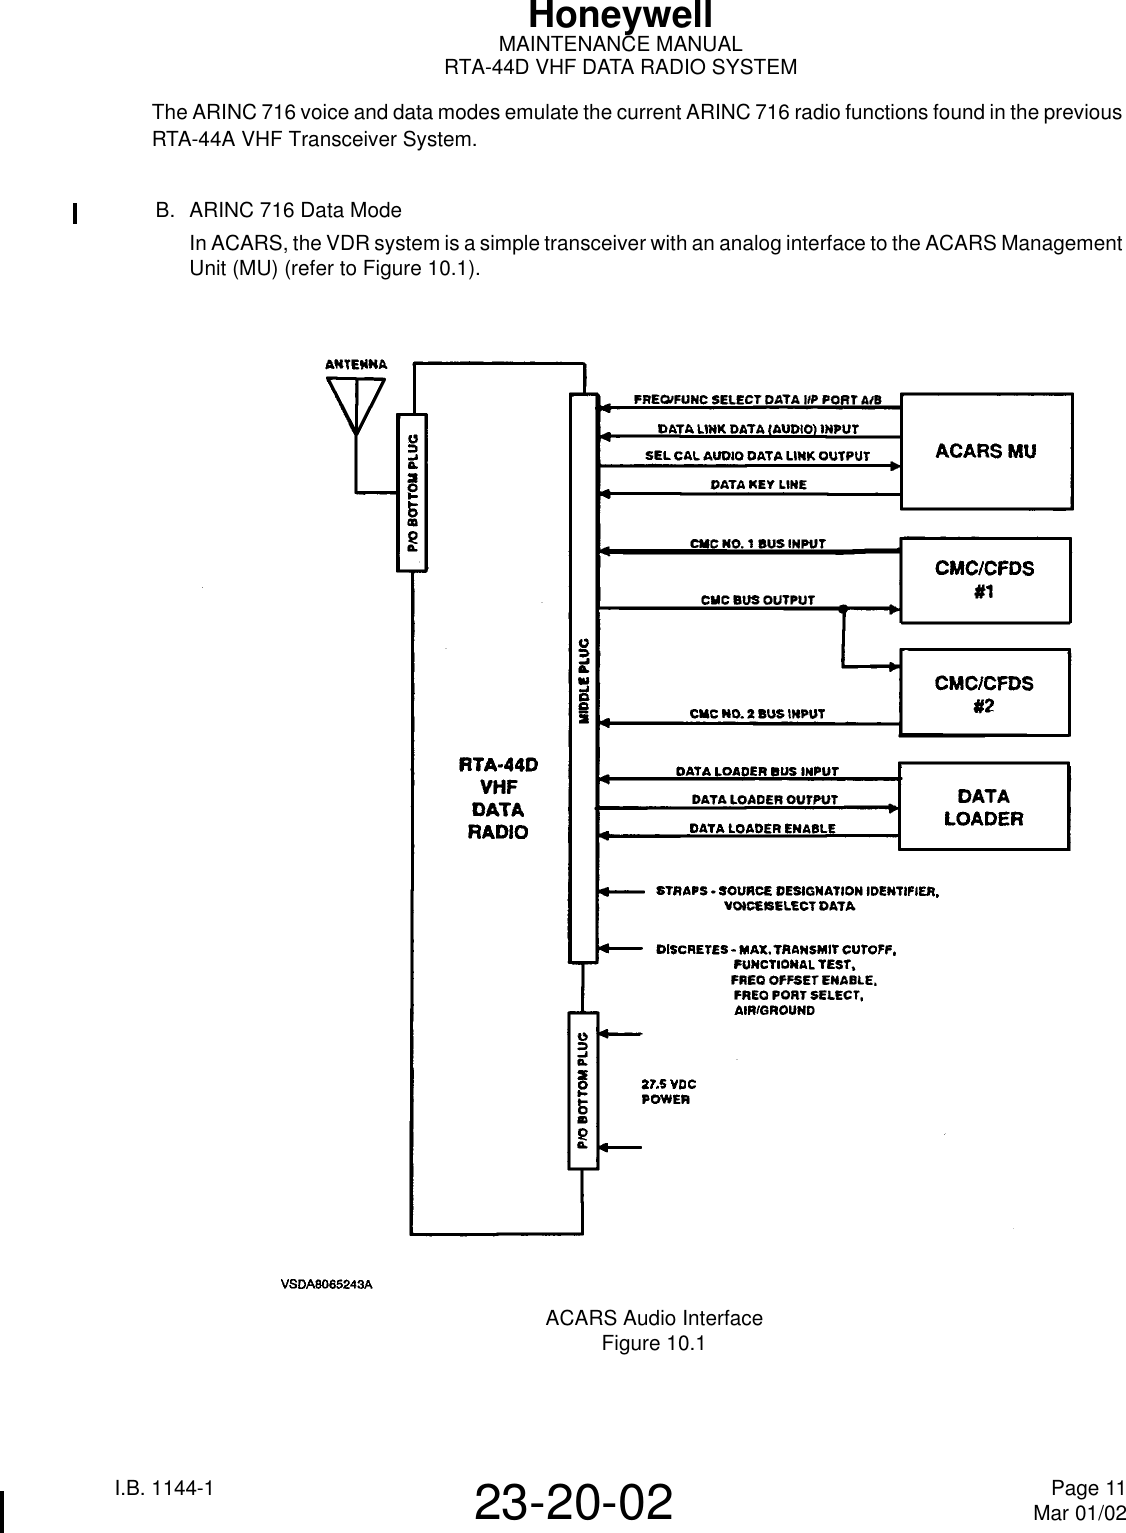 I.B. 1144-1 Page 11Mar 01/0223-20-02HoneywellMAINTENANCE MANUALRTA-44D VHF DATA RADIO SYSTEMThe ARINC 716 voice and data modes emulate the current ARINC 716 radio functions found in the previous RTA-44A VHF Transceiver System.B. ARINC 716 Data ModeIn ACARS, the VDR system is a simple transceiver with an analog interface to the ACARS Management Unit (MU) (refer to Figure 10.1).ACARS Audio InterfaceFigure 10.1